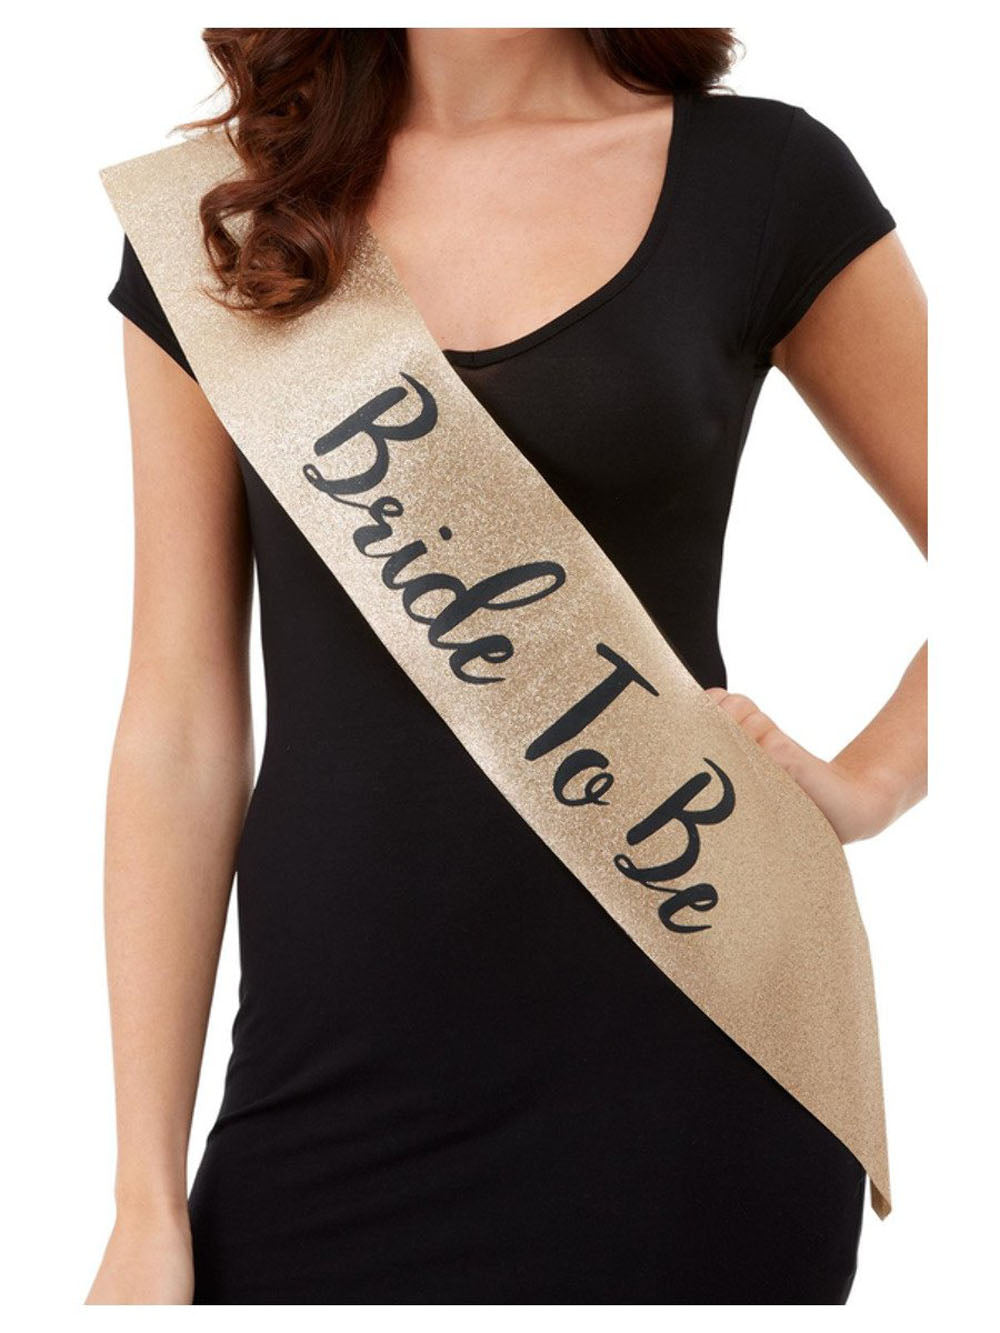 Deluxe Glitter Bride to Be Sash - Black and Gold FV-52193